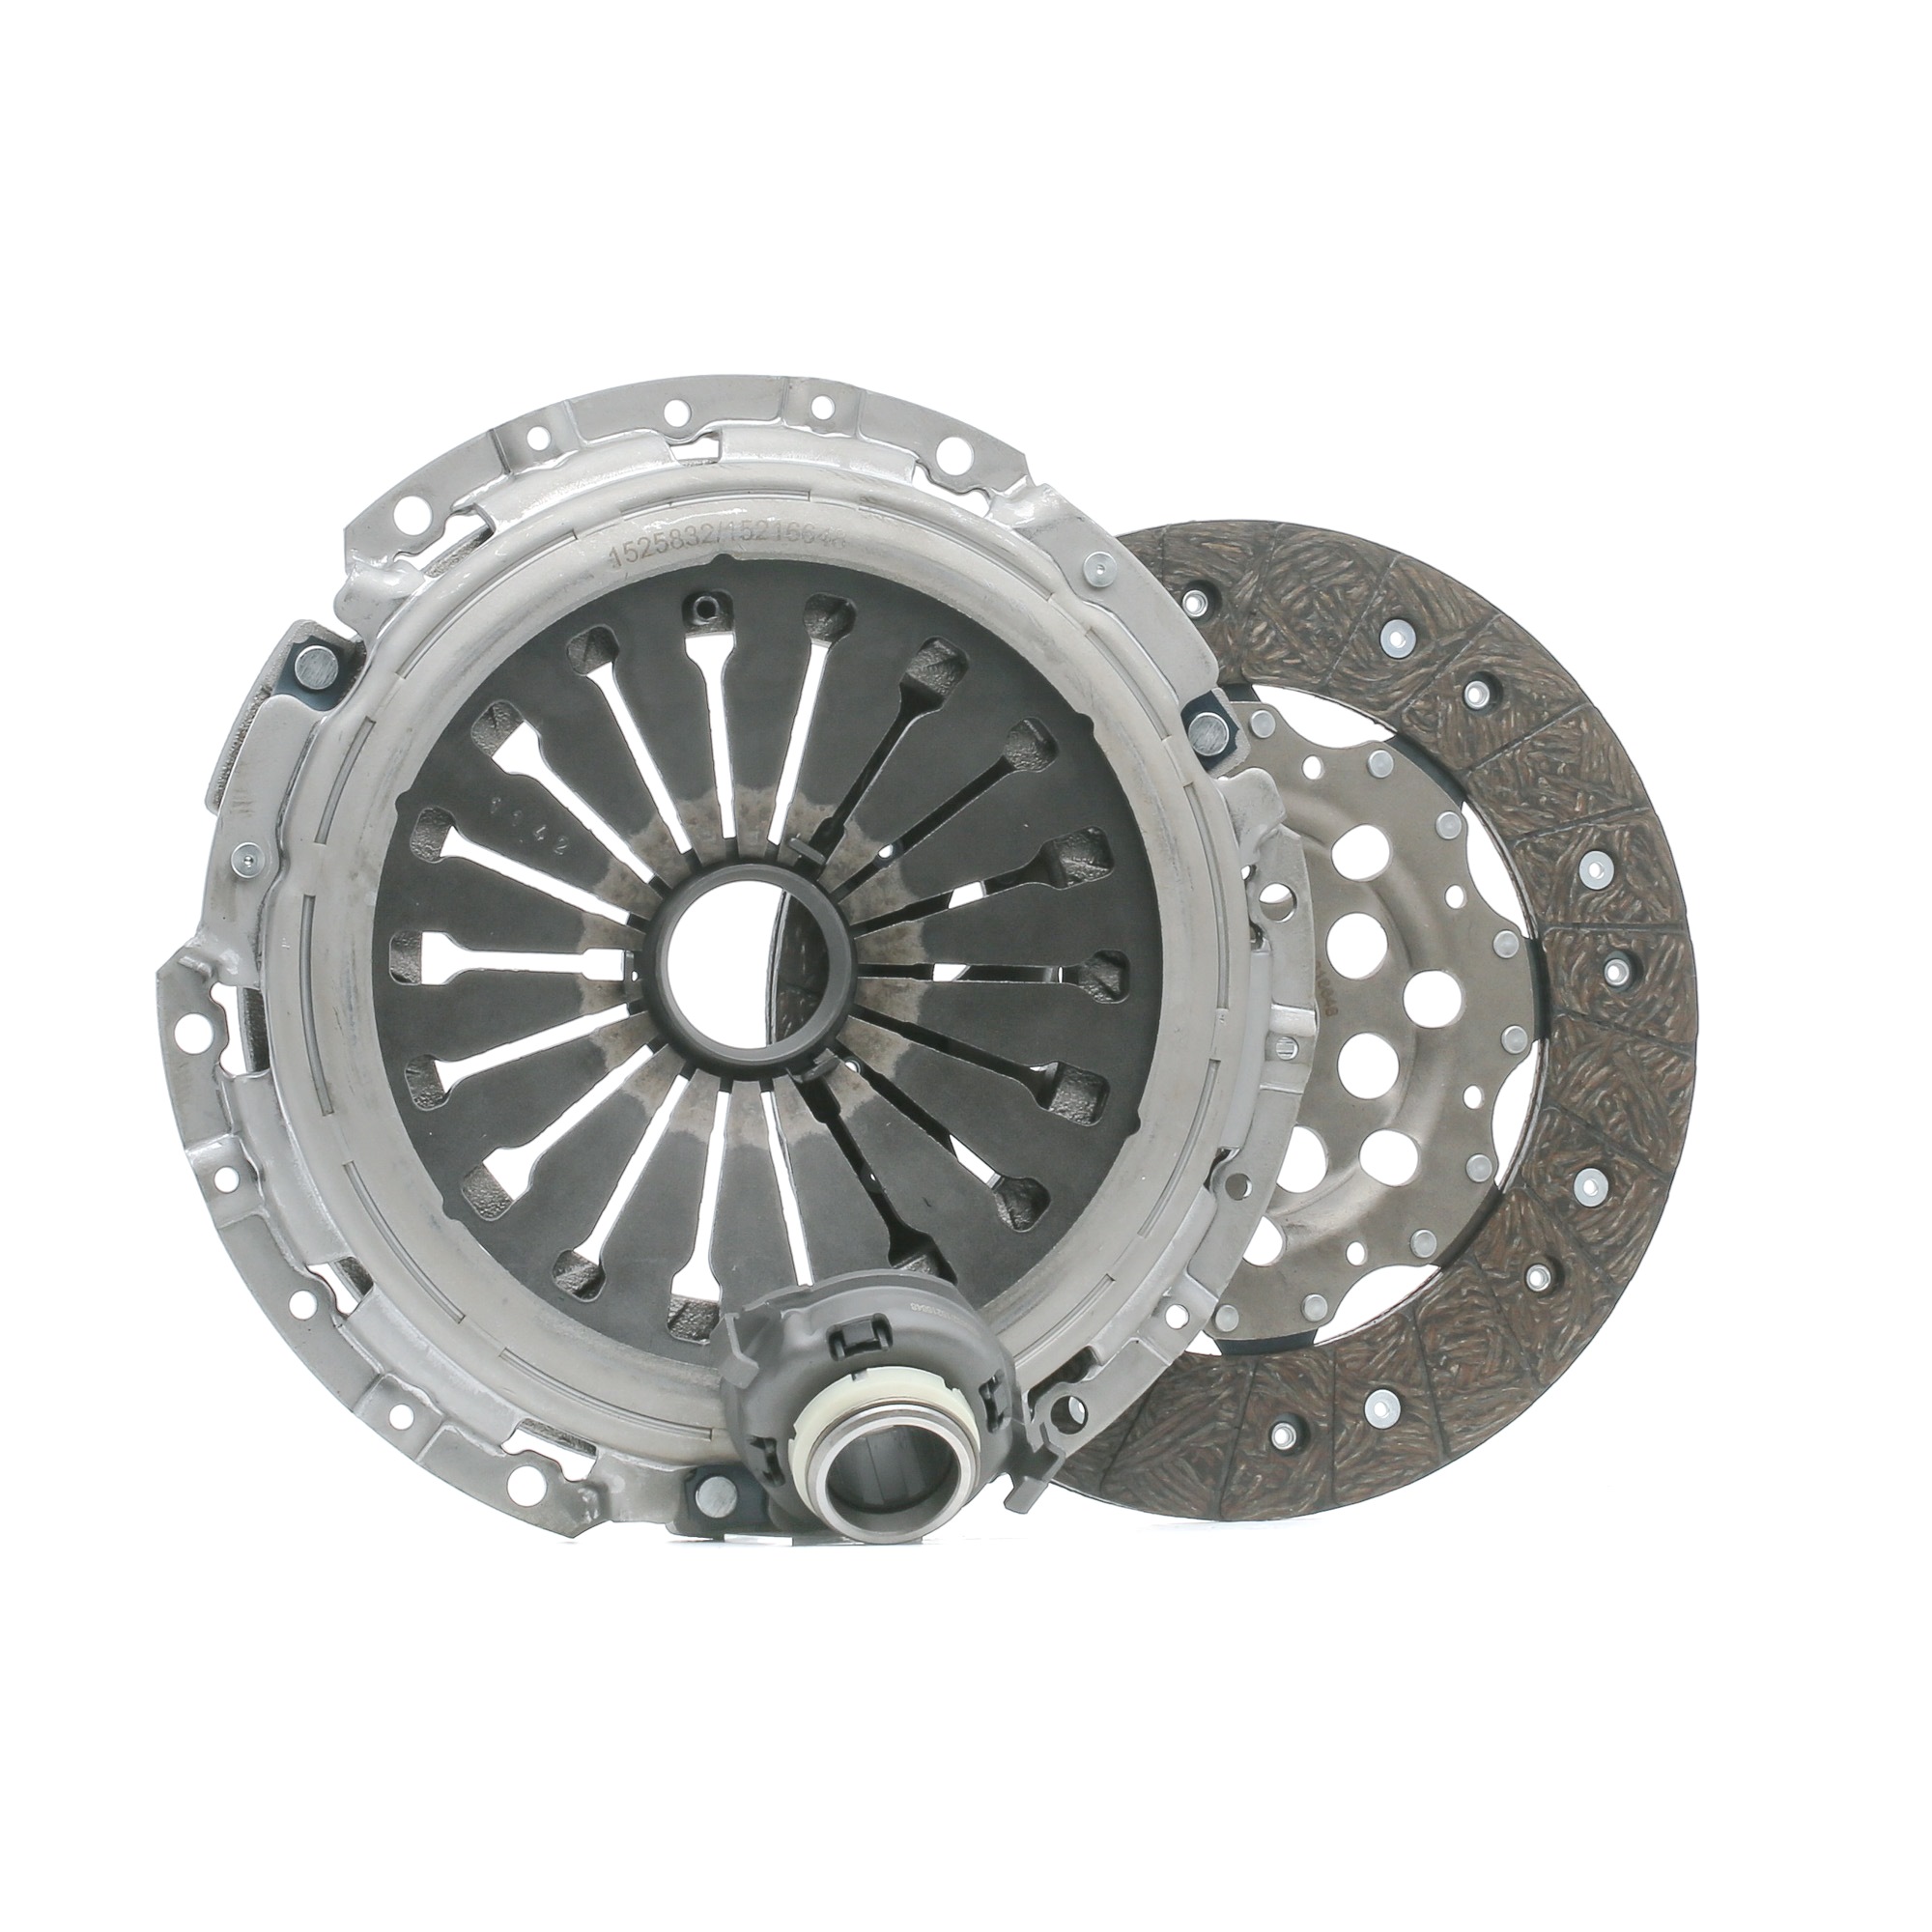 479C0328 RIDEX Clutch set FIAT for engines with dual-mass flywheel, with clutch release bearing, with clutch disc, Check and replace dual-mass flywheel if necessary., 240mm